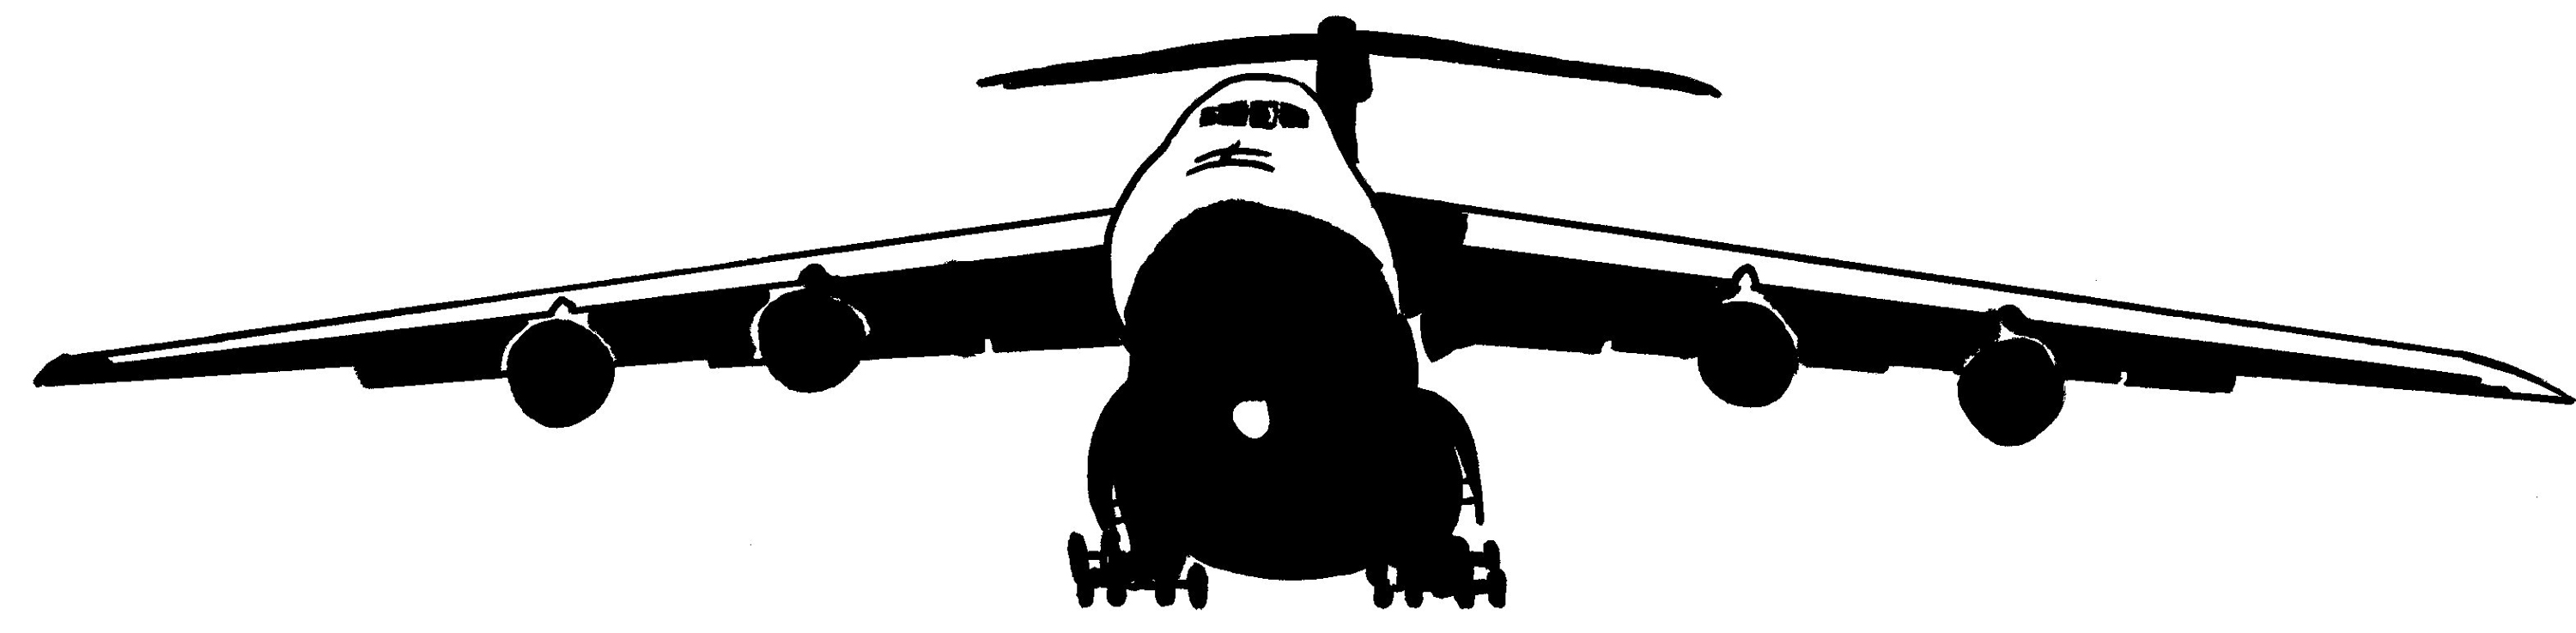 Arnold Air Force Base - Media Gallery - Clipart library - Clipart library